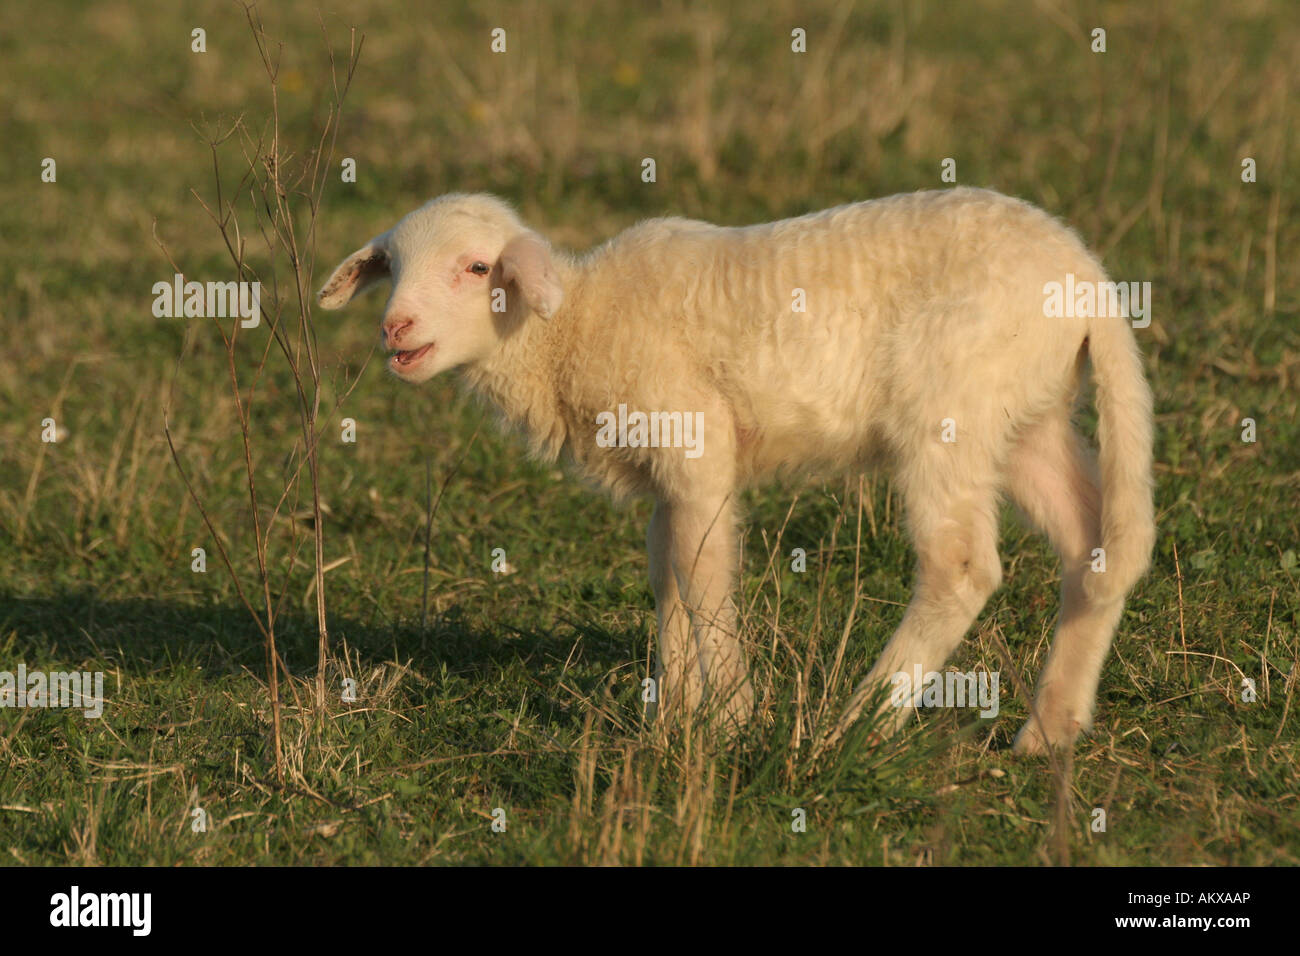 Young bleating sheep Stock Photo